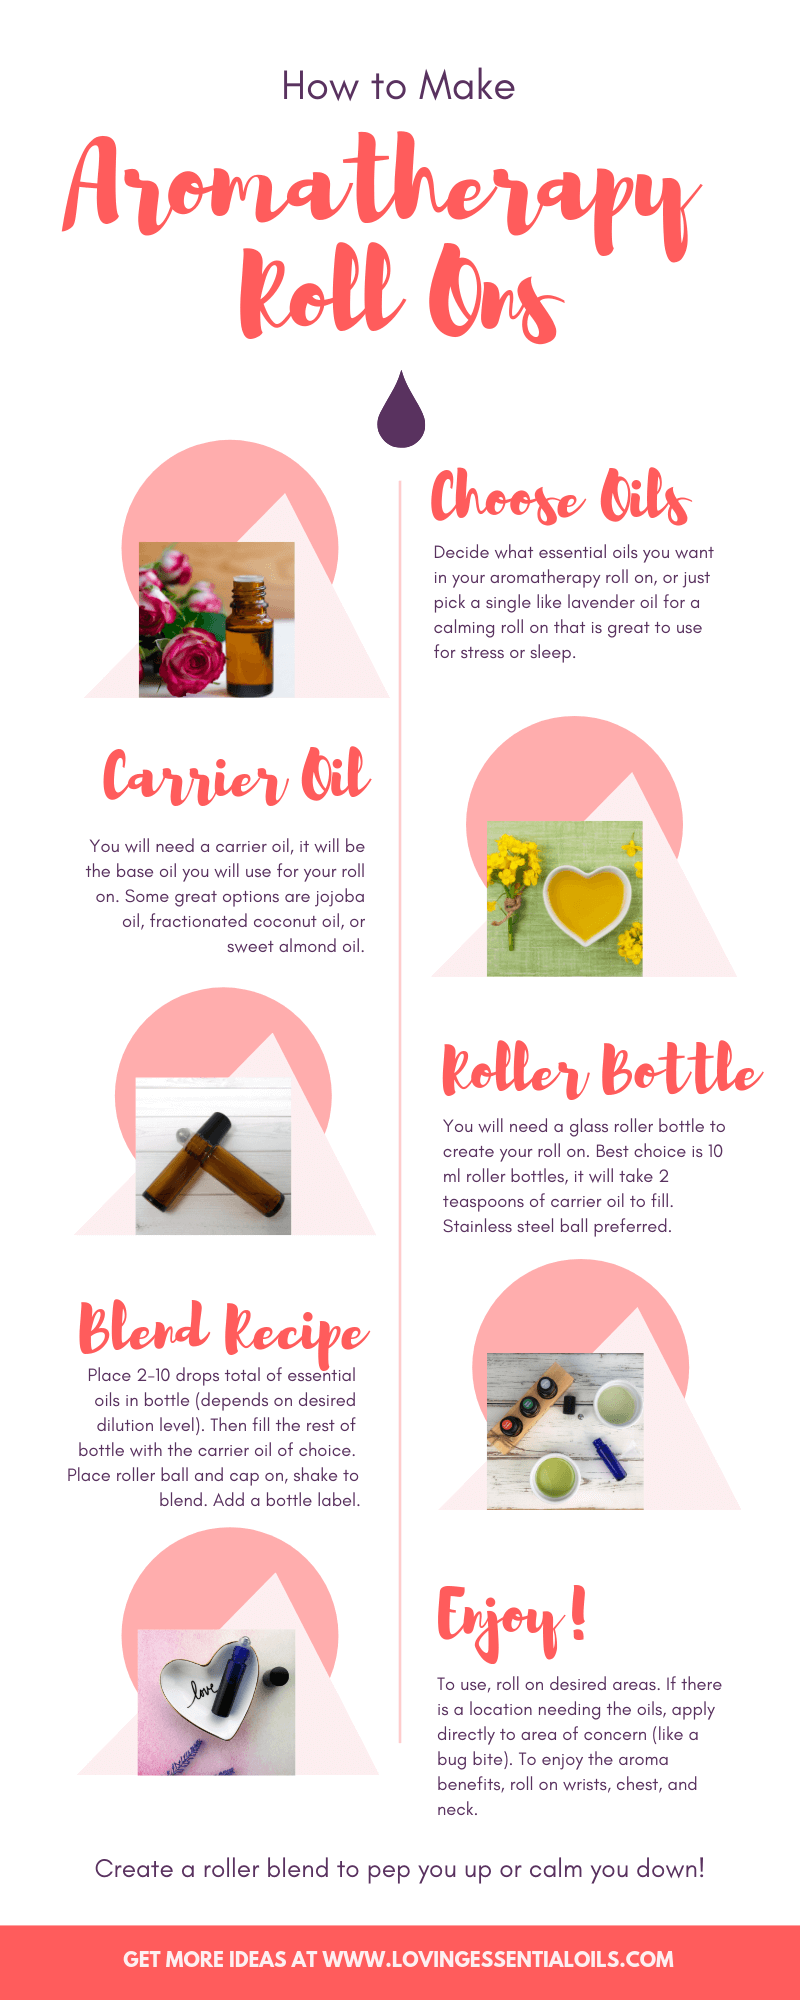 How to Make Aromatherapy Roller Recipes - A Simple Tutorial by Loving Essential Oils